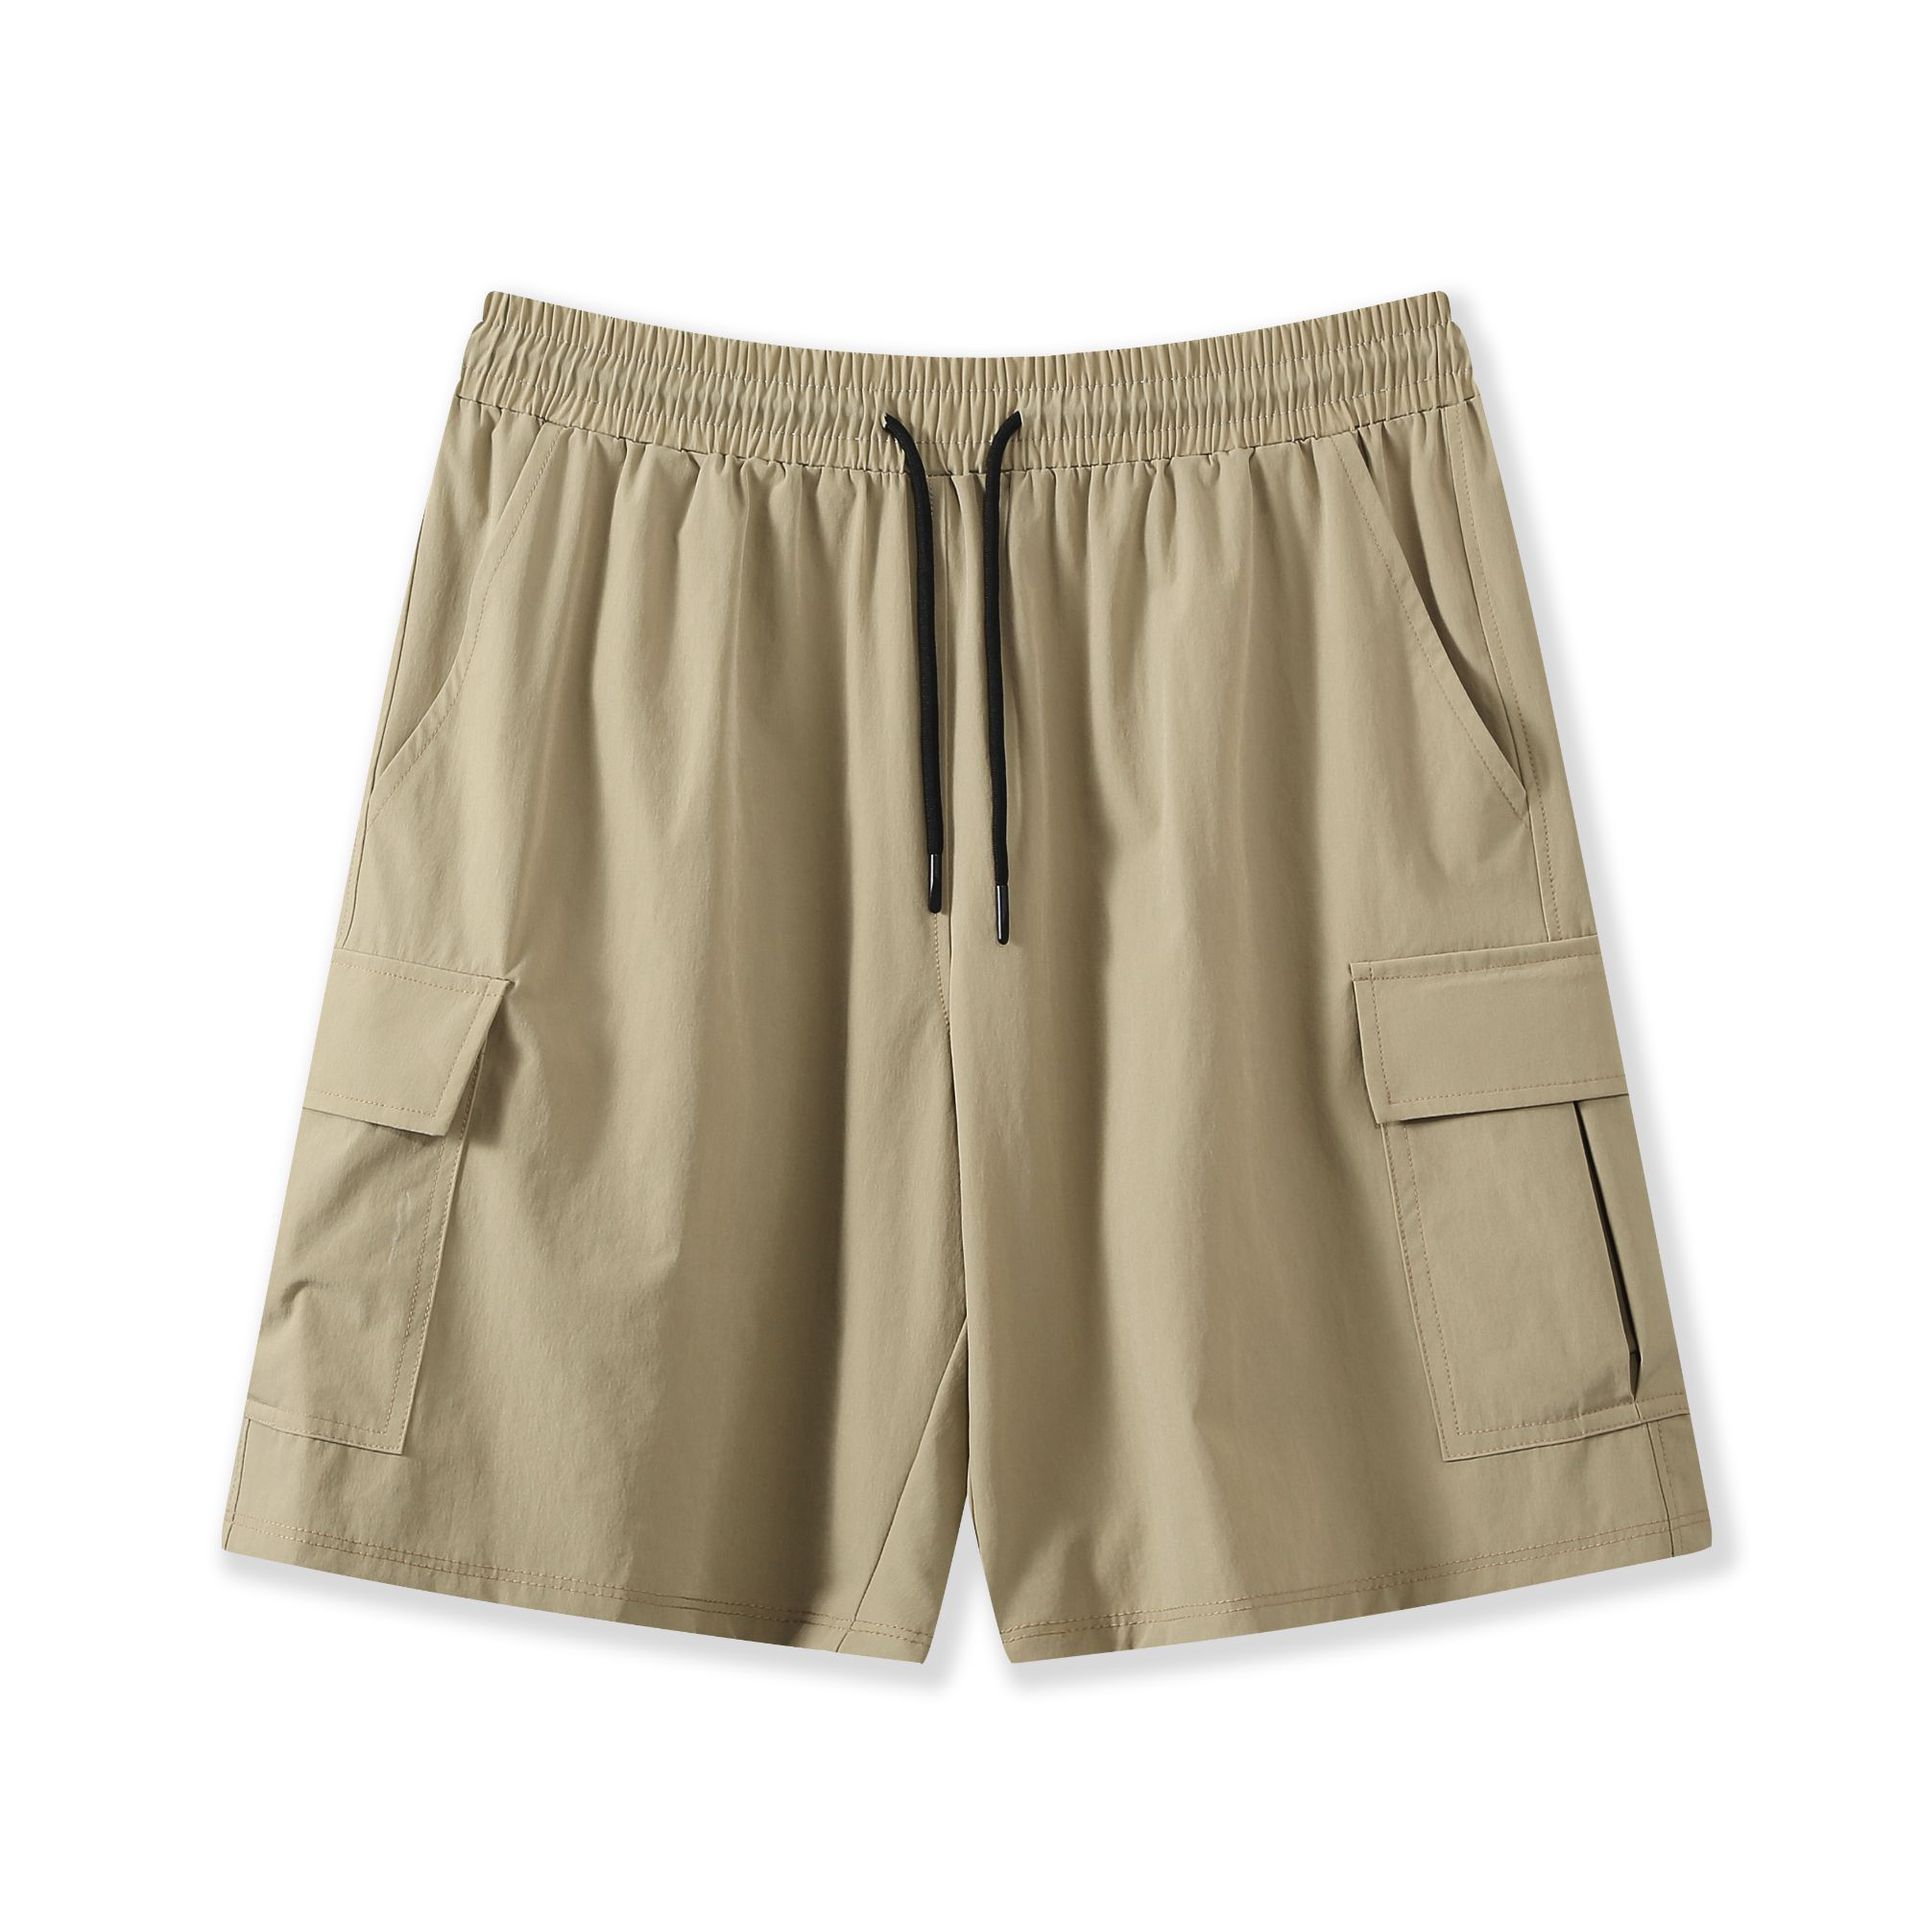 Men's Casual Athletic Mid-Length Shorts for Running, Training, and Fit